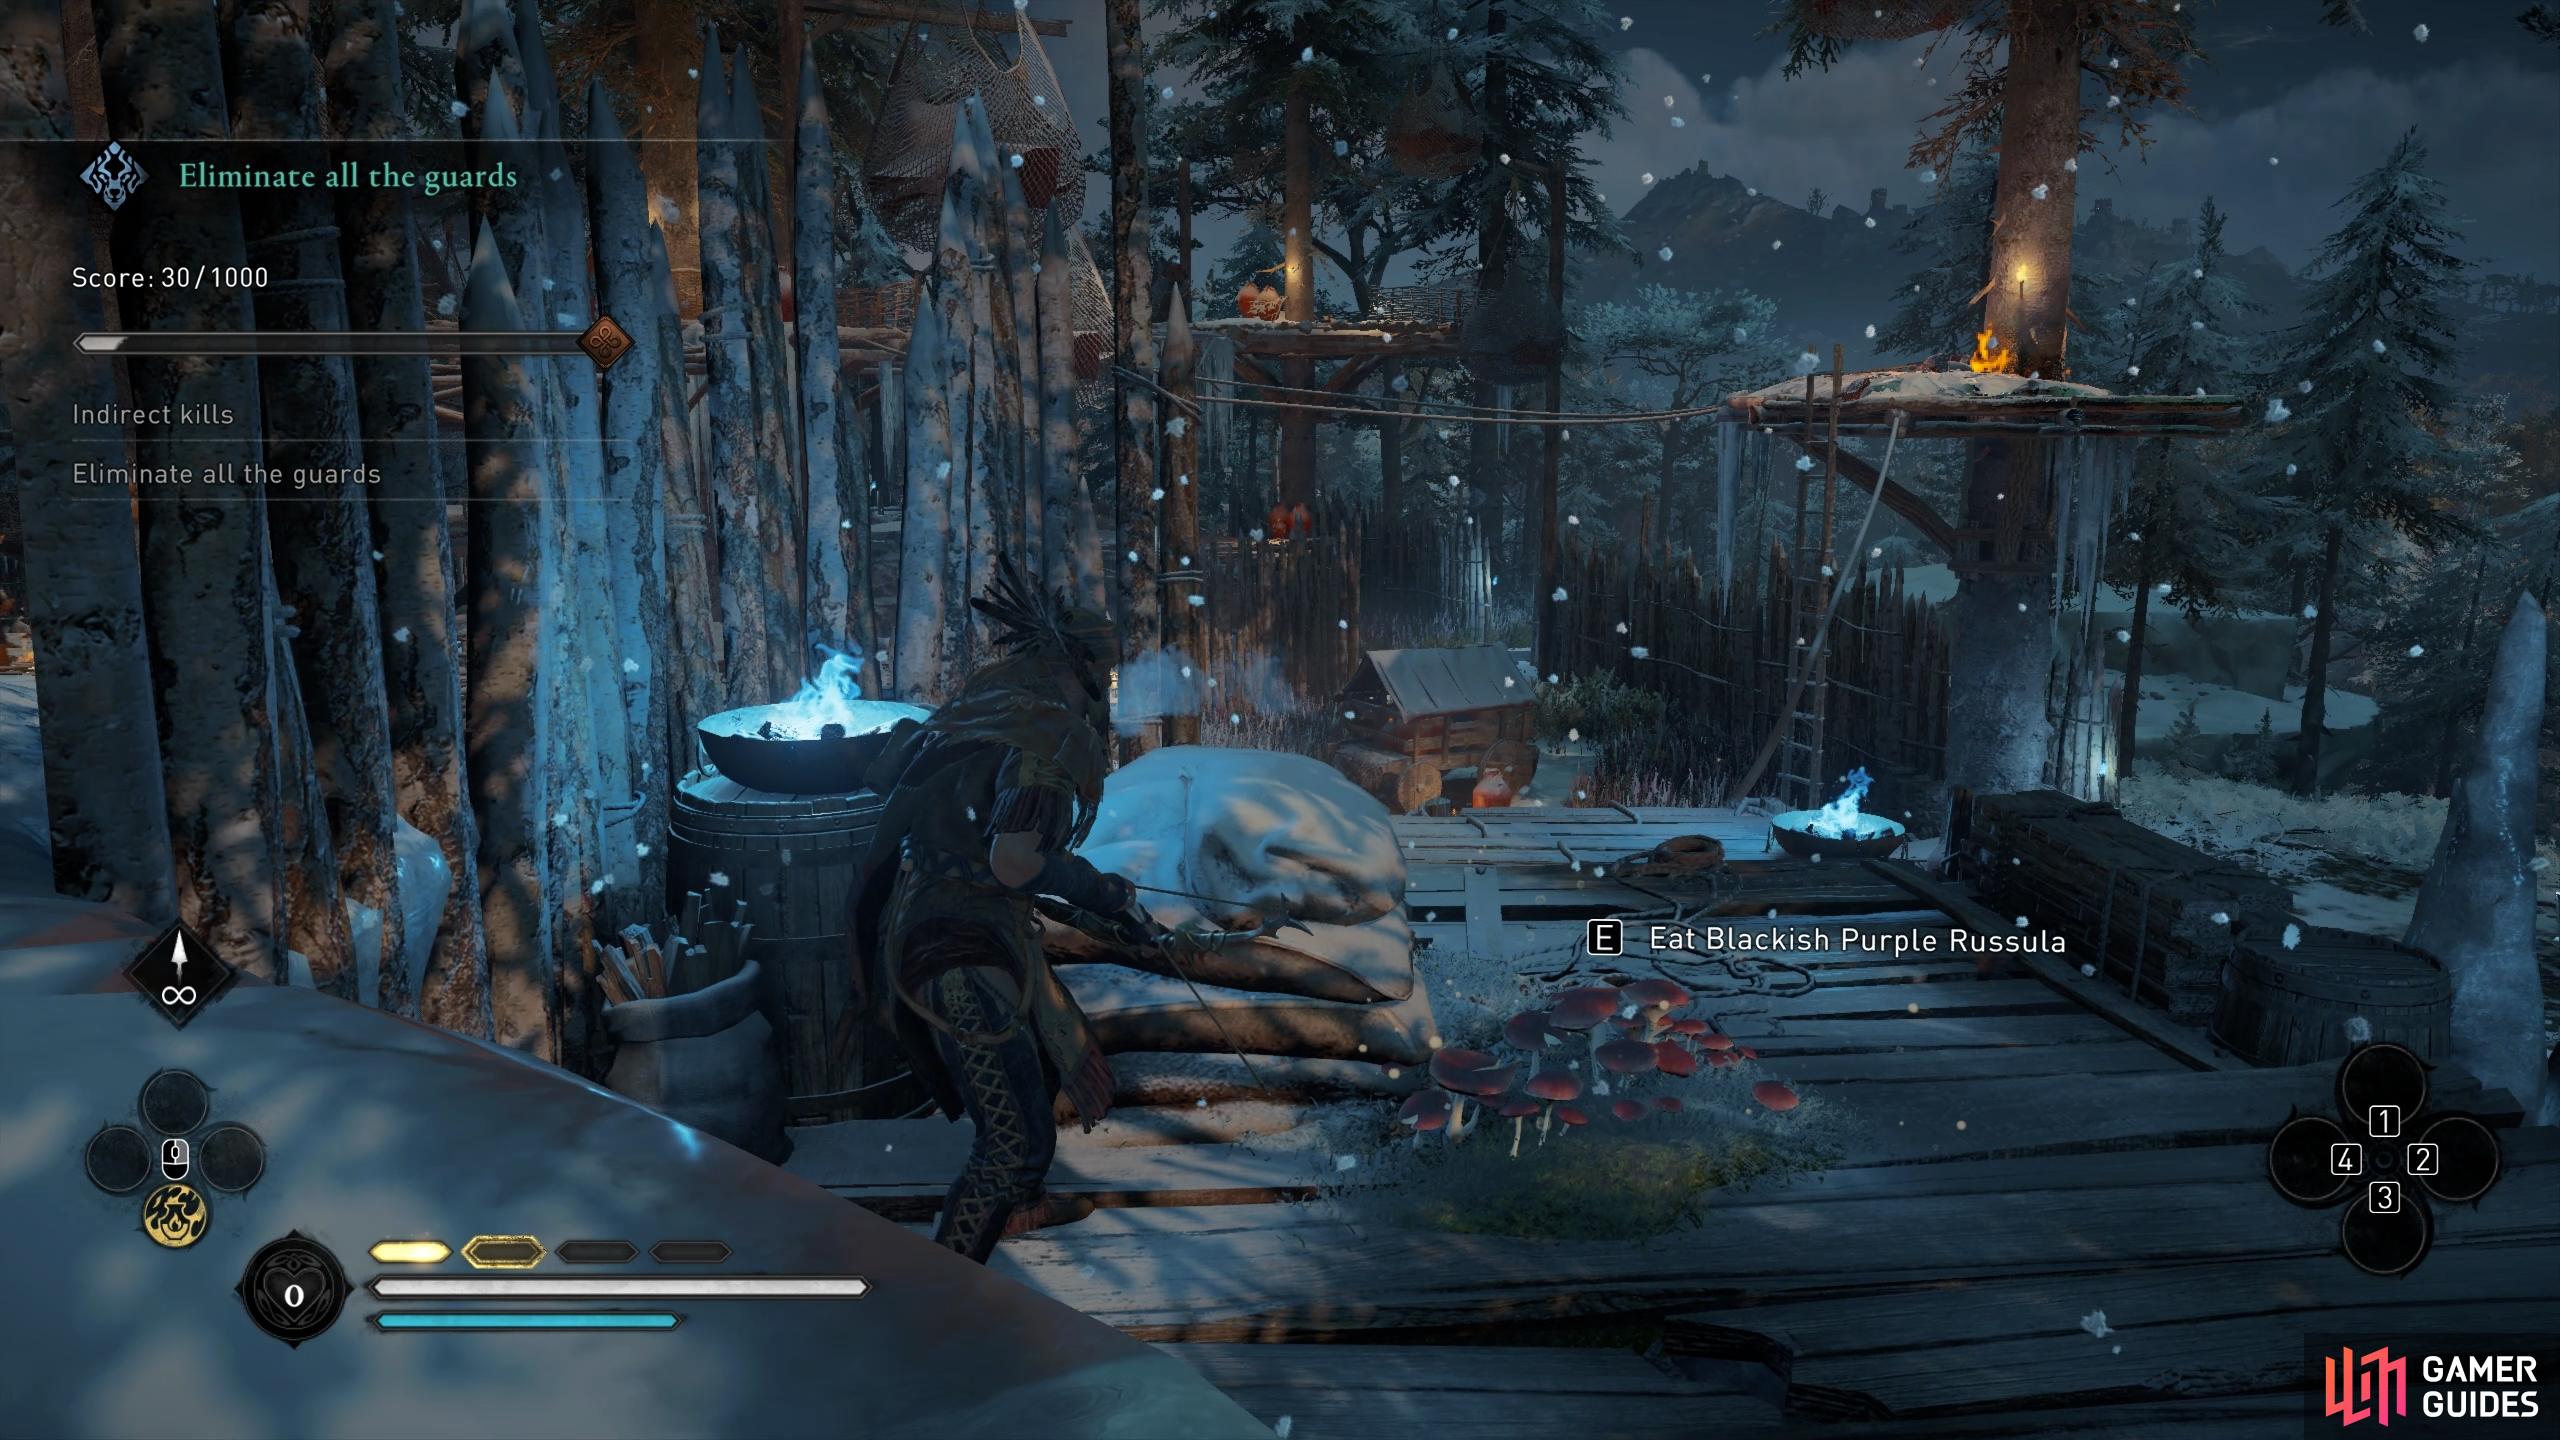 You'll find mushrooms scattered throughout the outpost which can be consumed to replenish adrenaline.